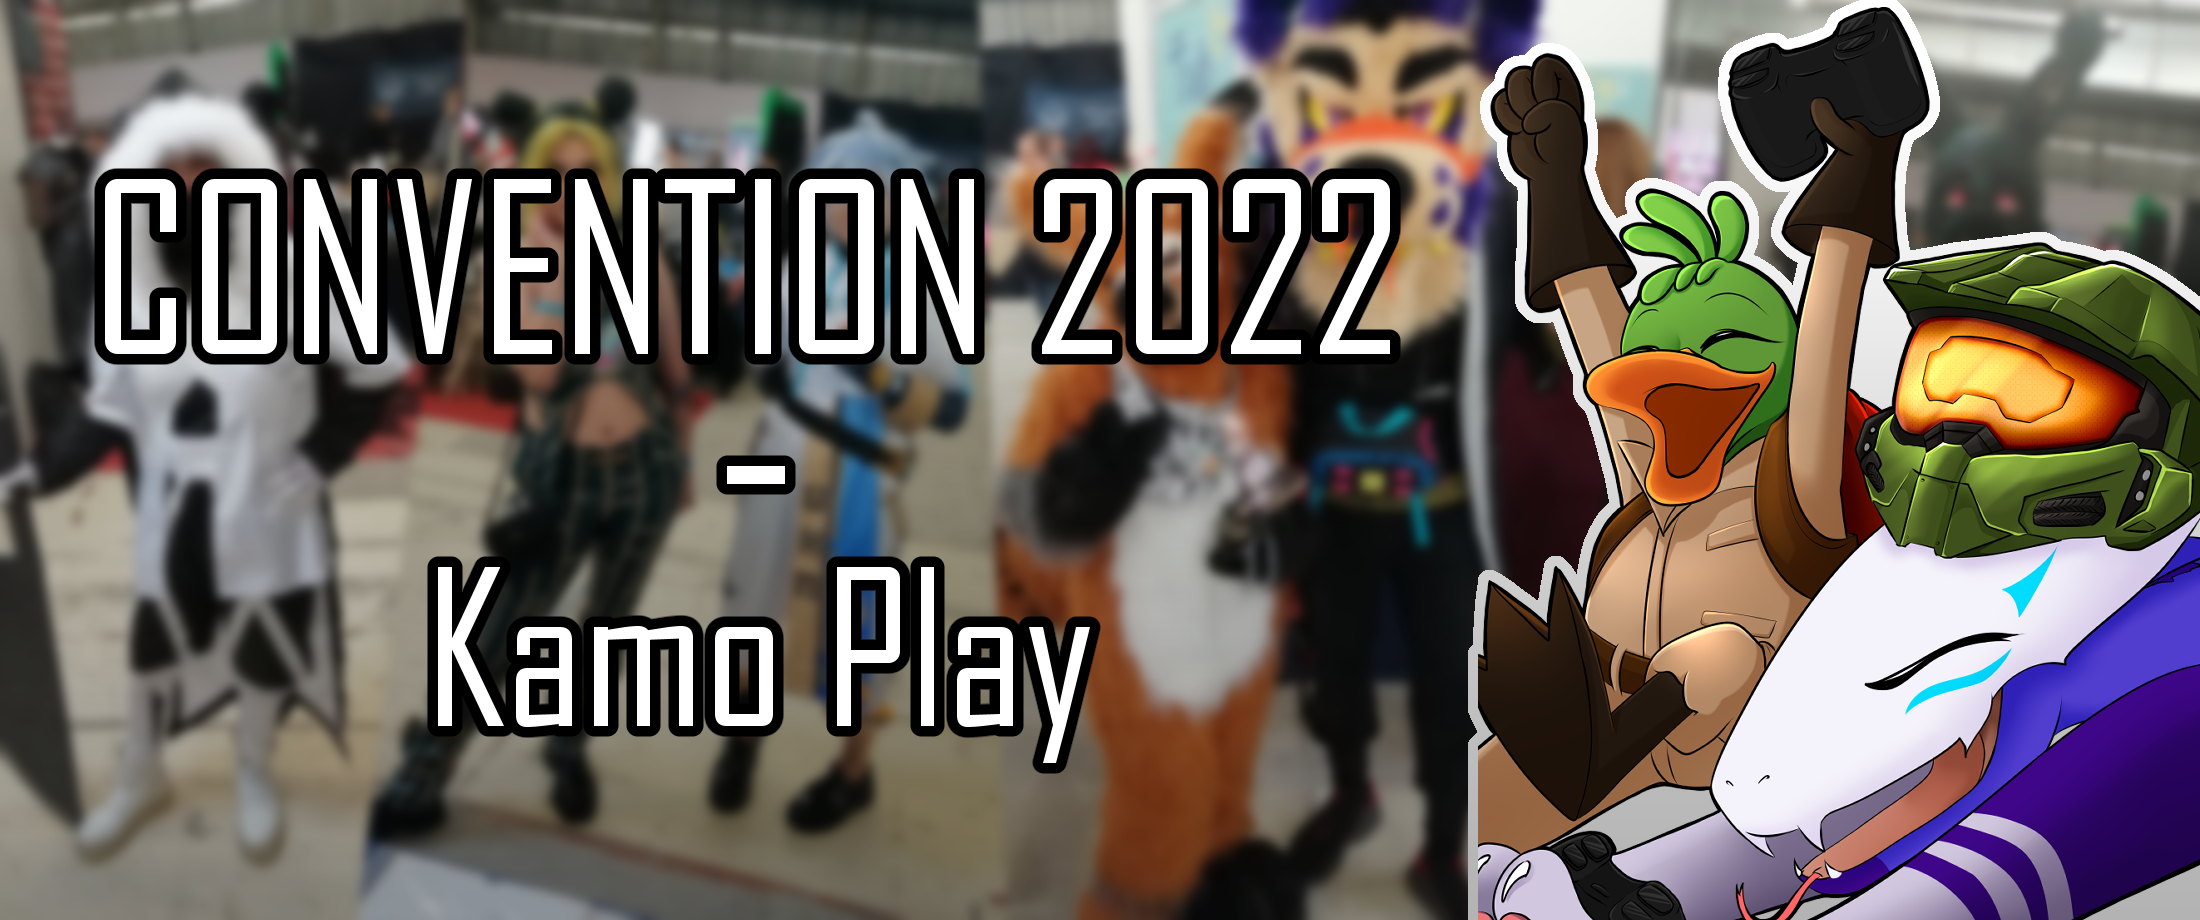 You are currently viewing KamoPlay 2022